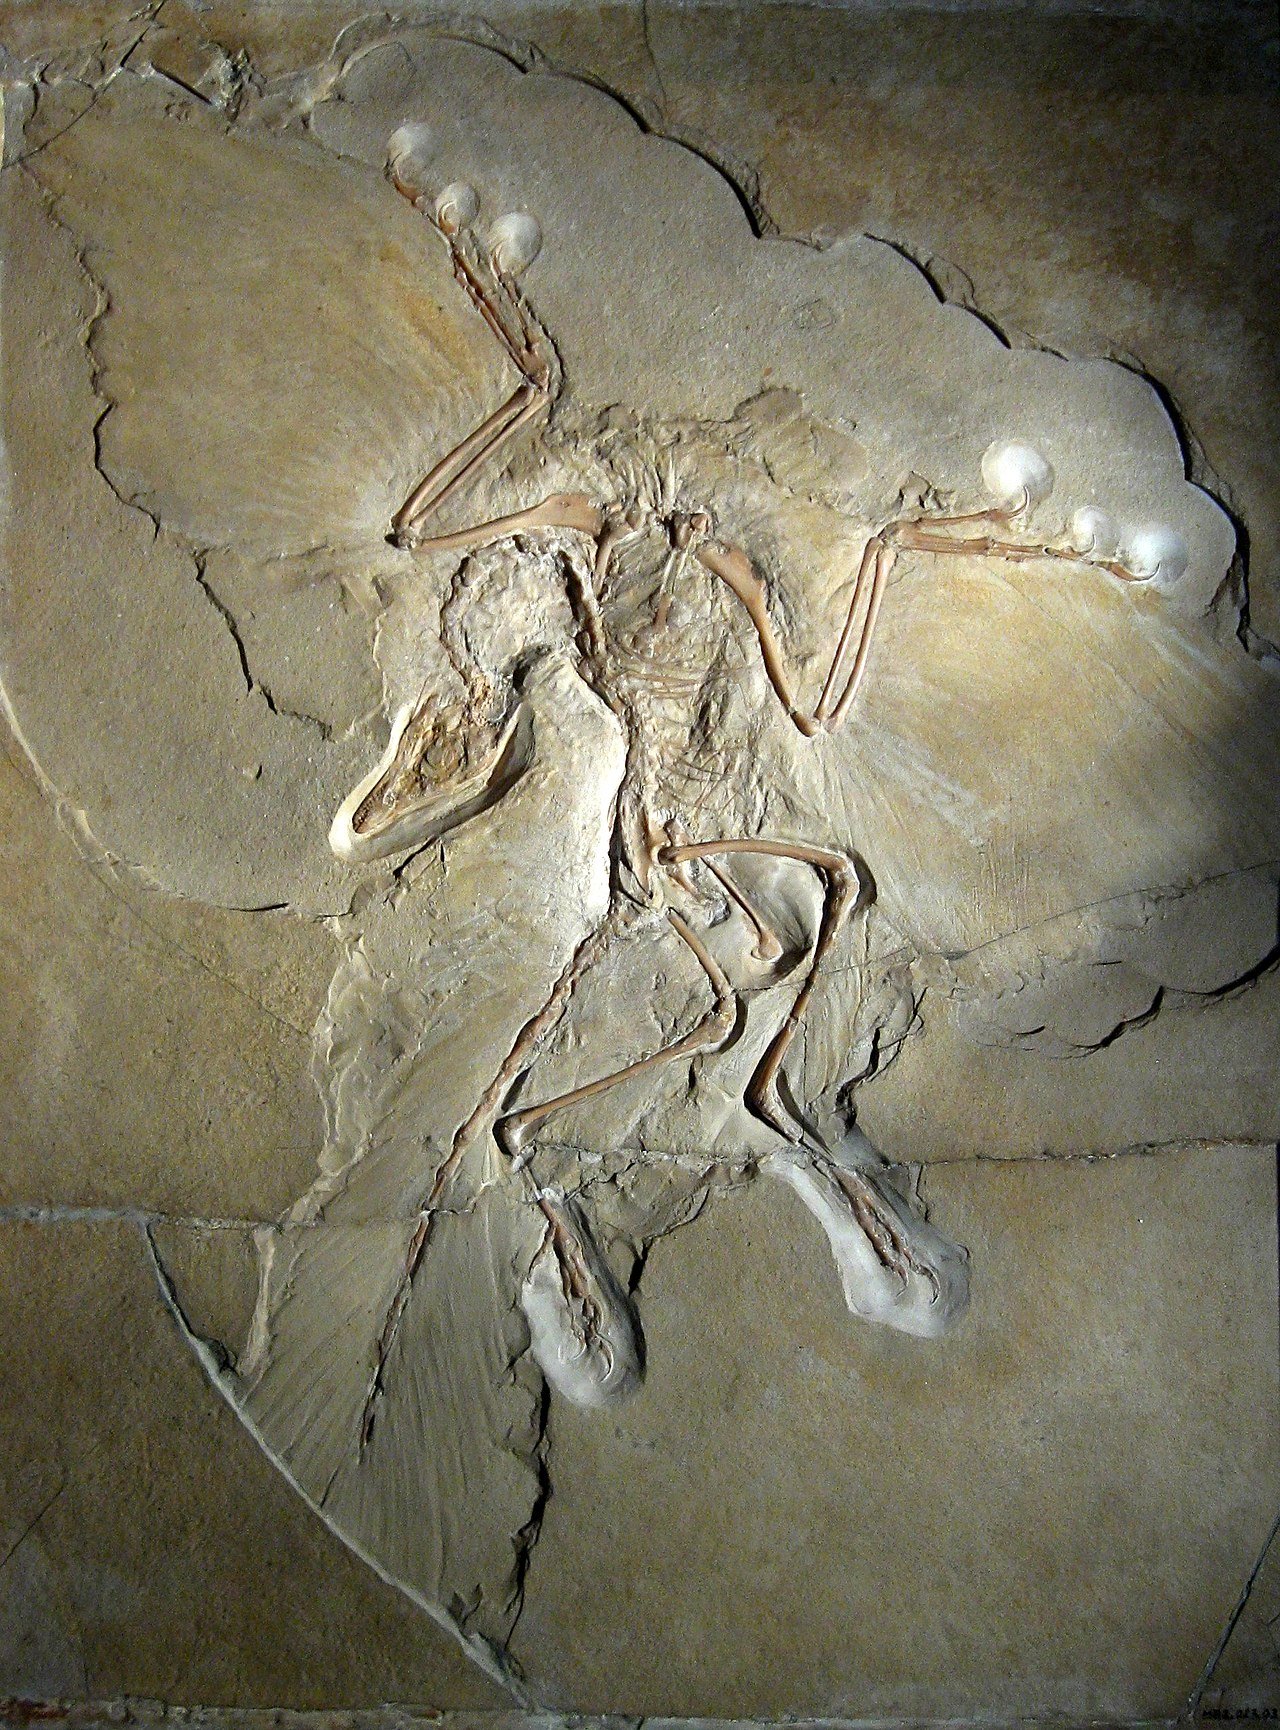 Archaeopteryx, an early bird from the Jurassic Period